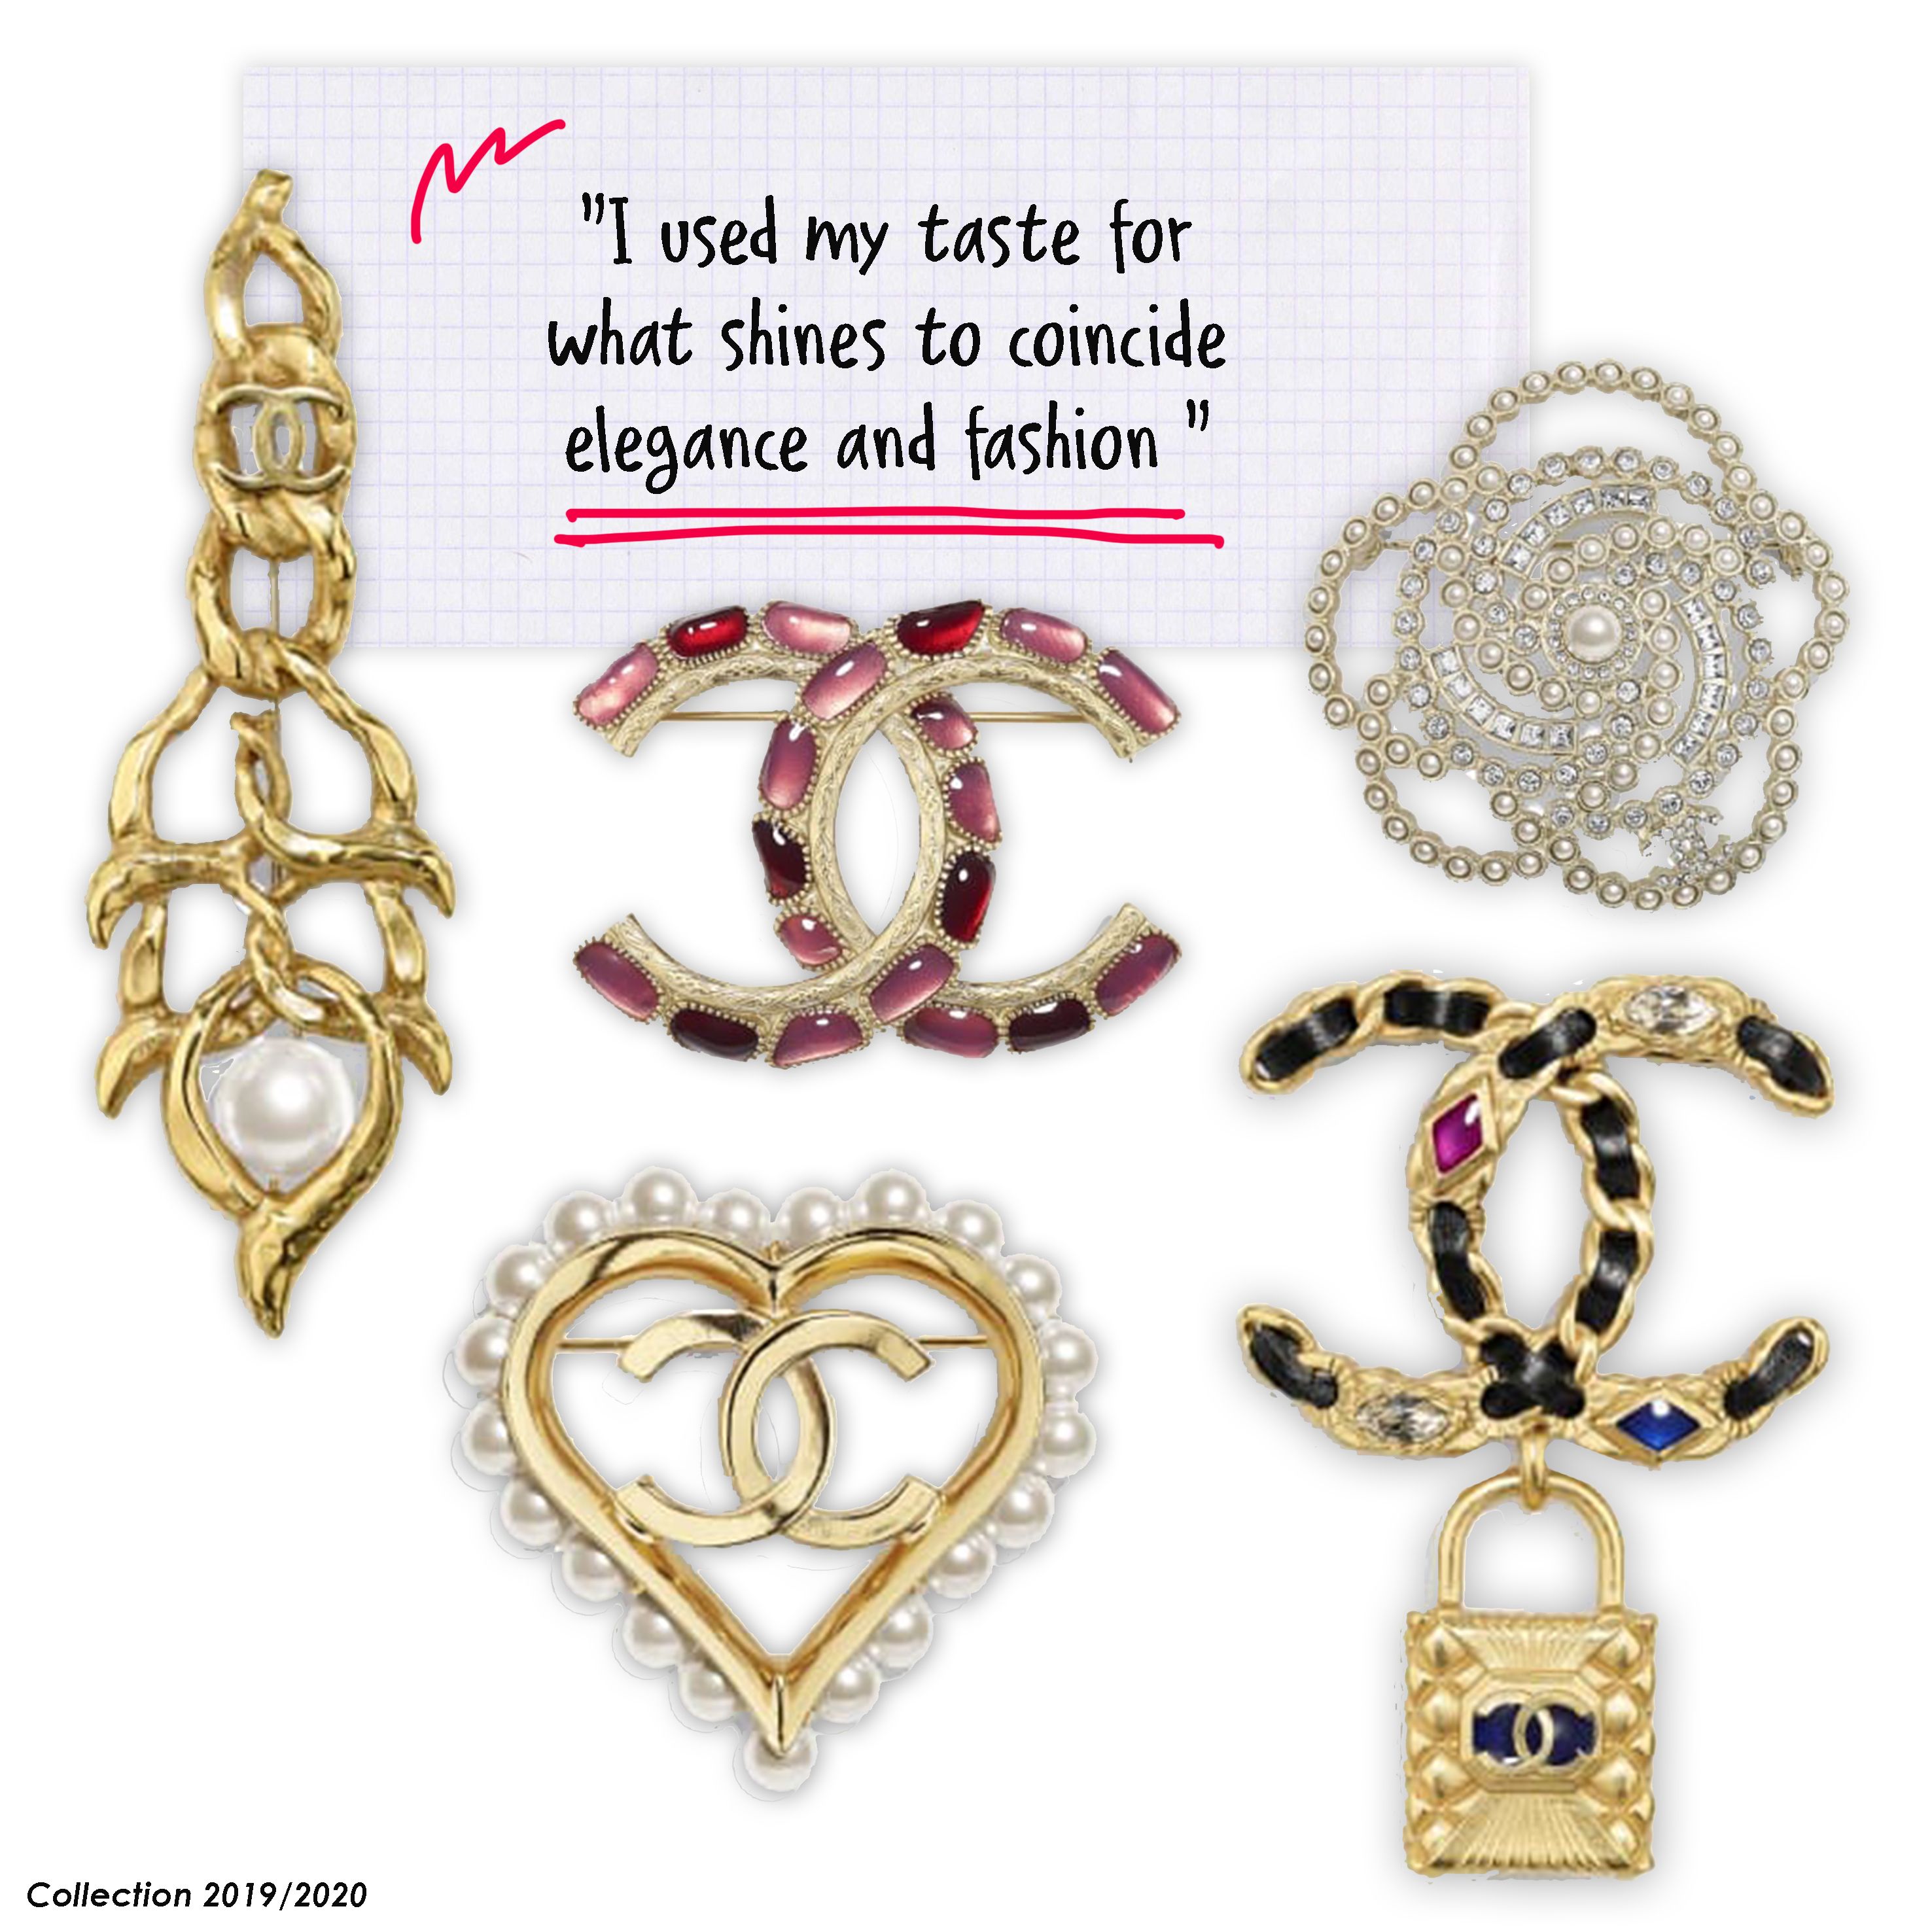 The Chanel brooch is the most iconic bijoux to have